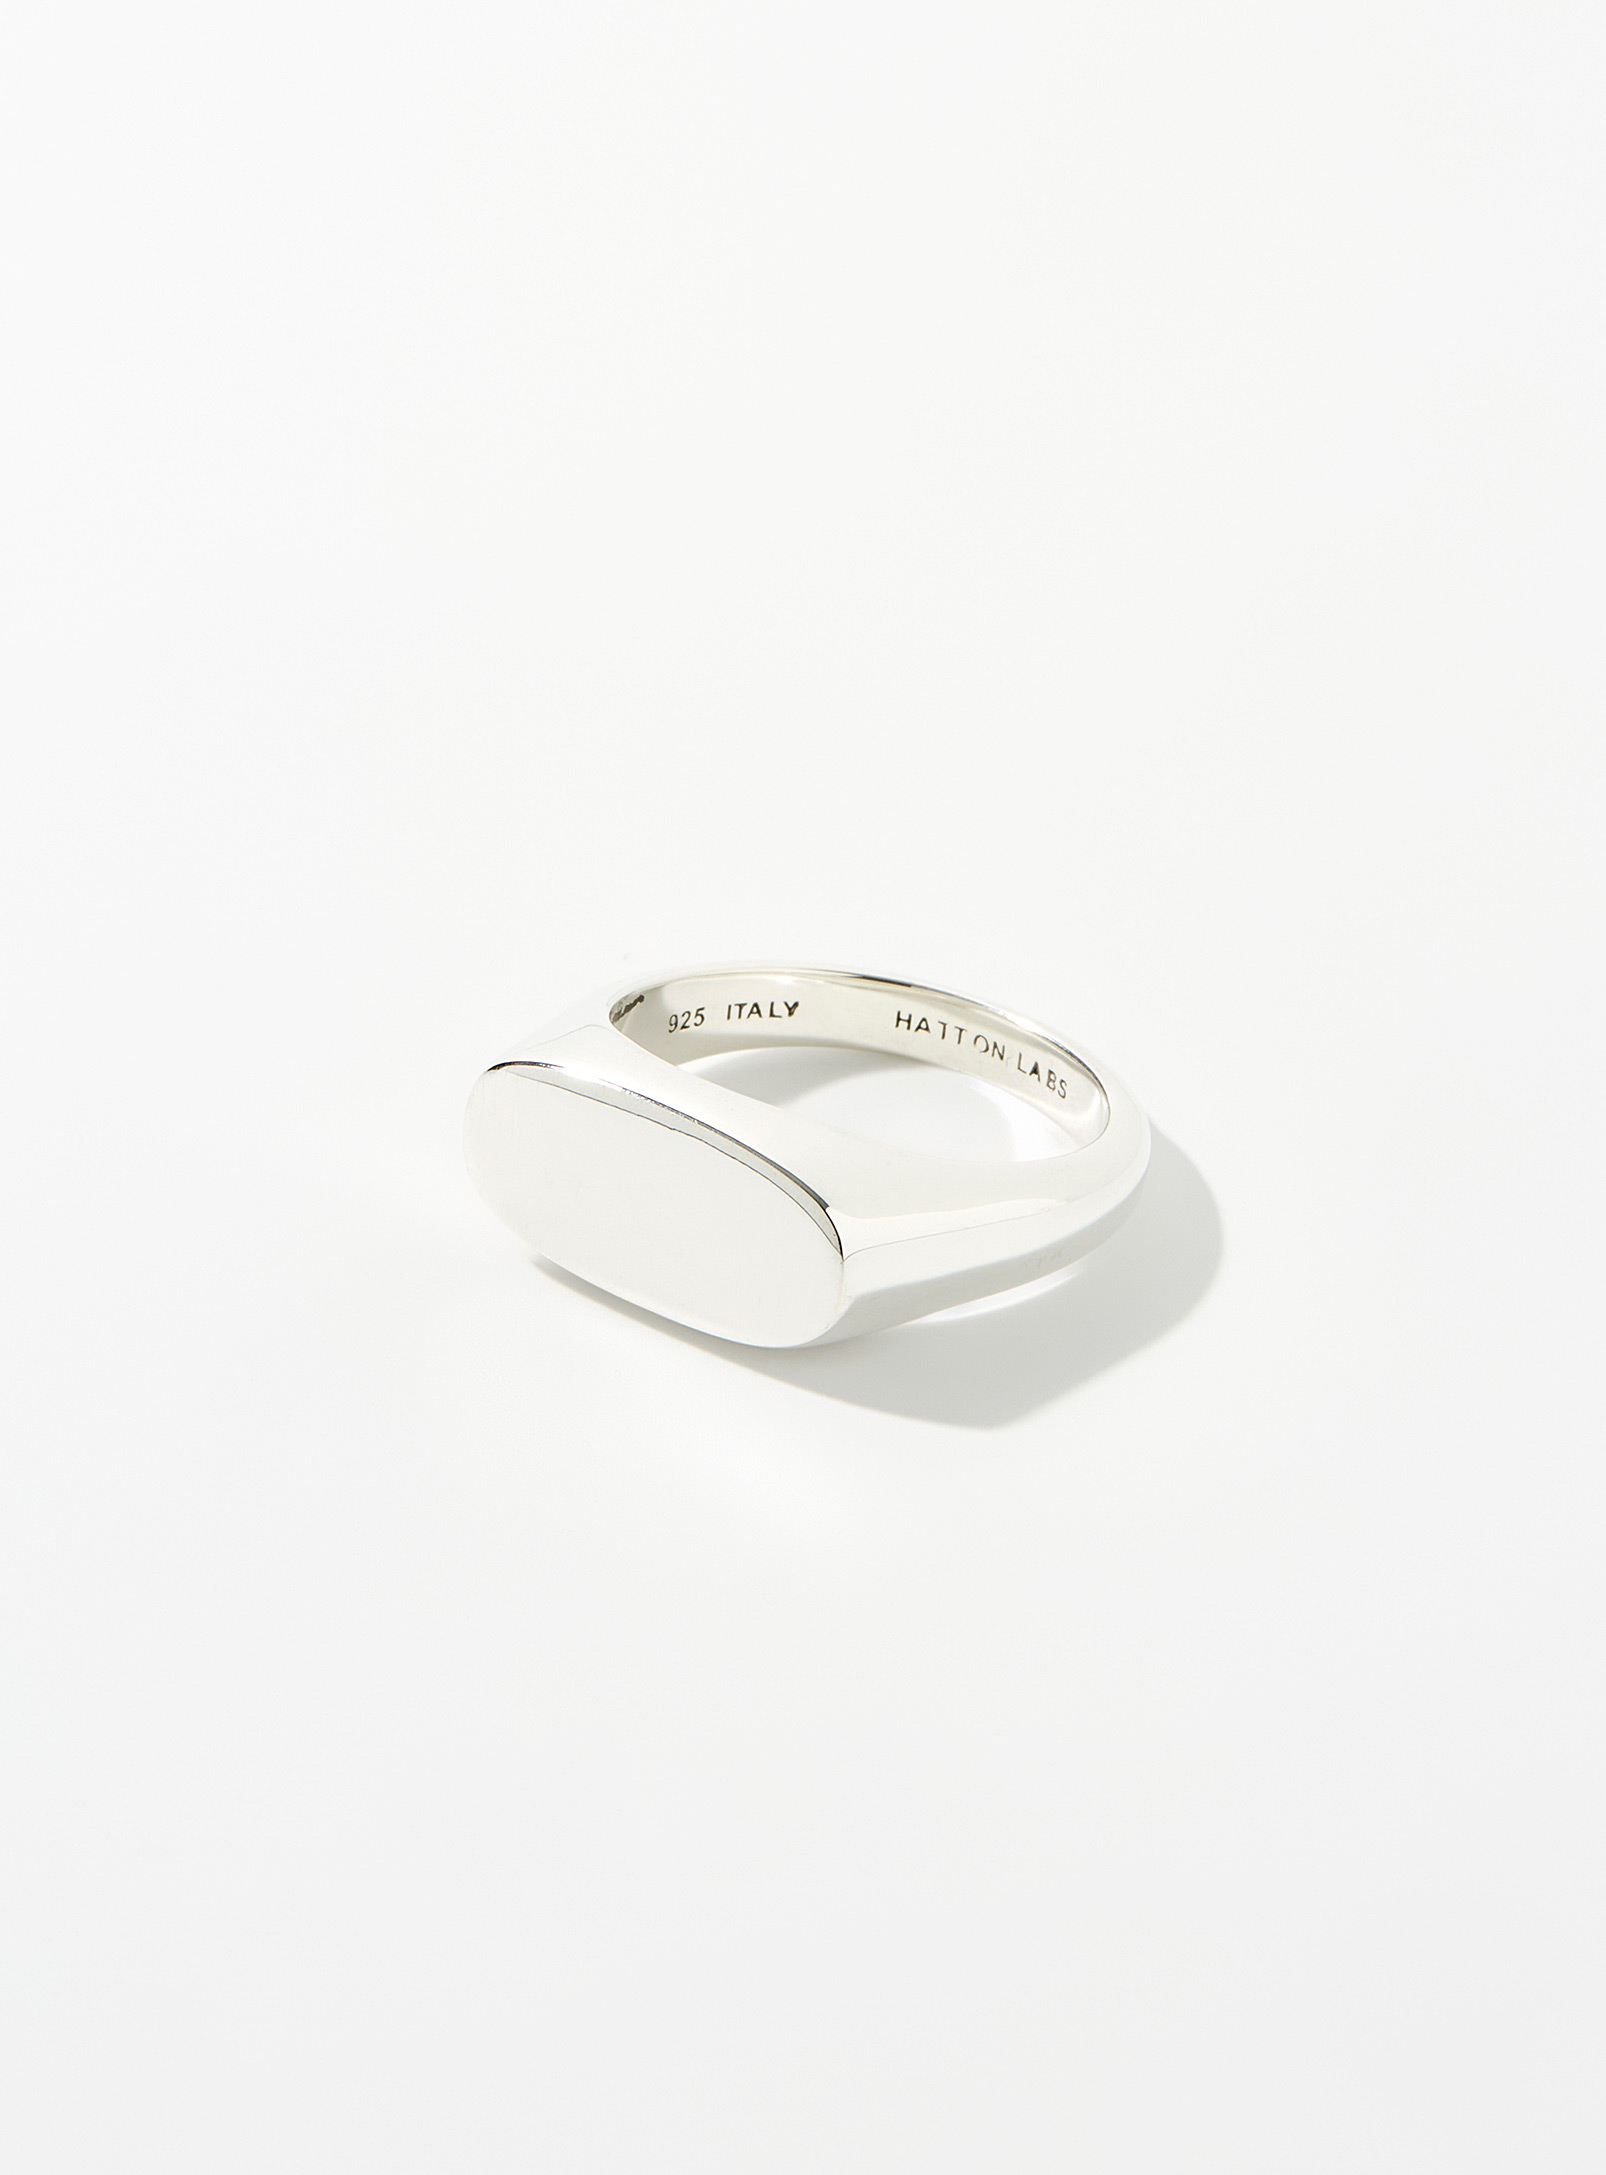 Hatton Labs - Men's Squashed signet ring